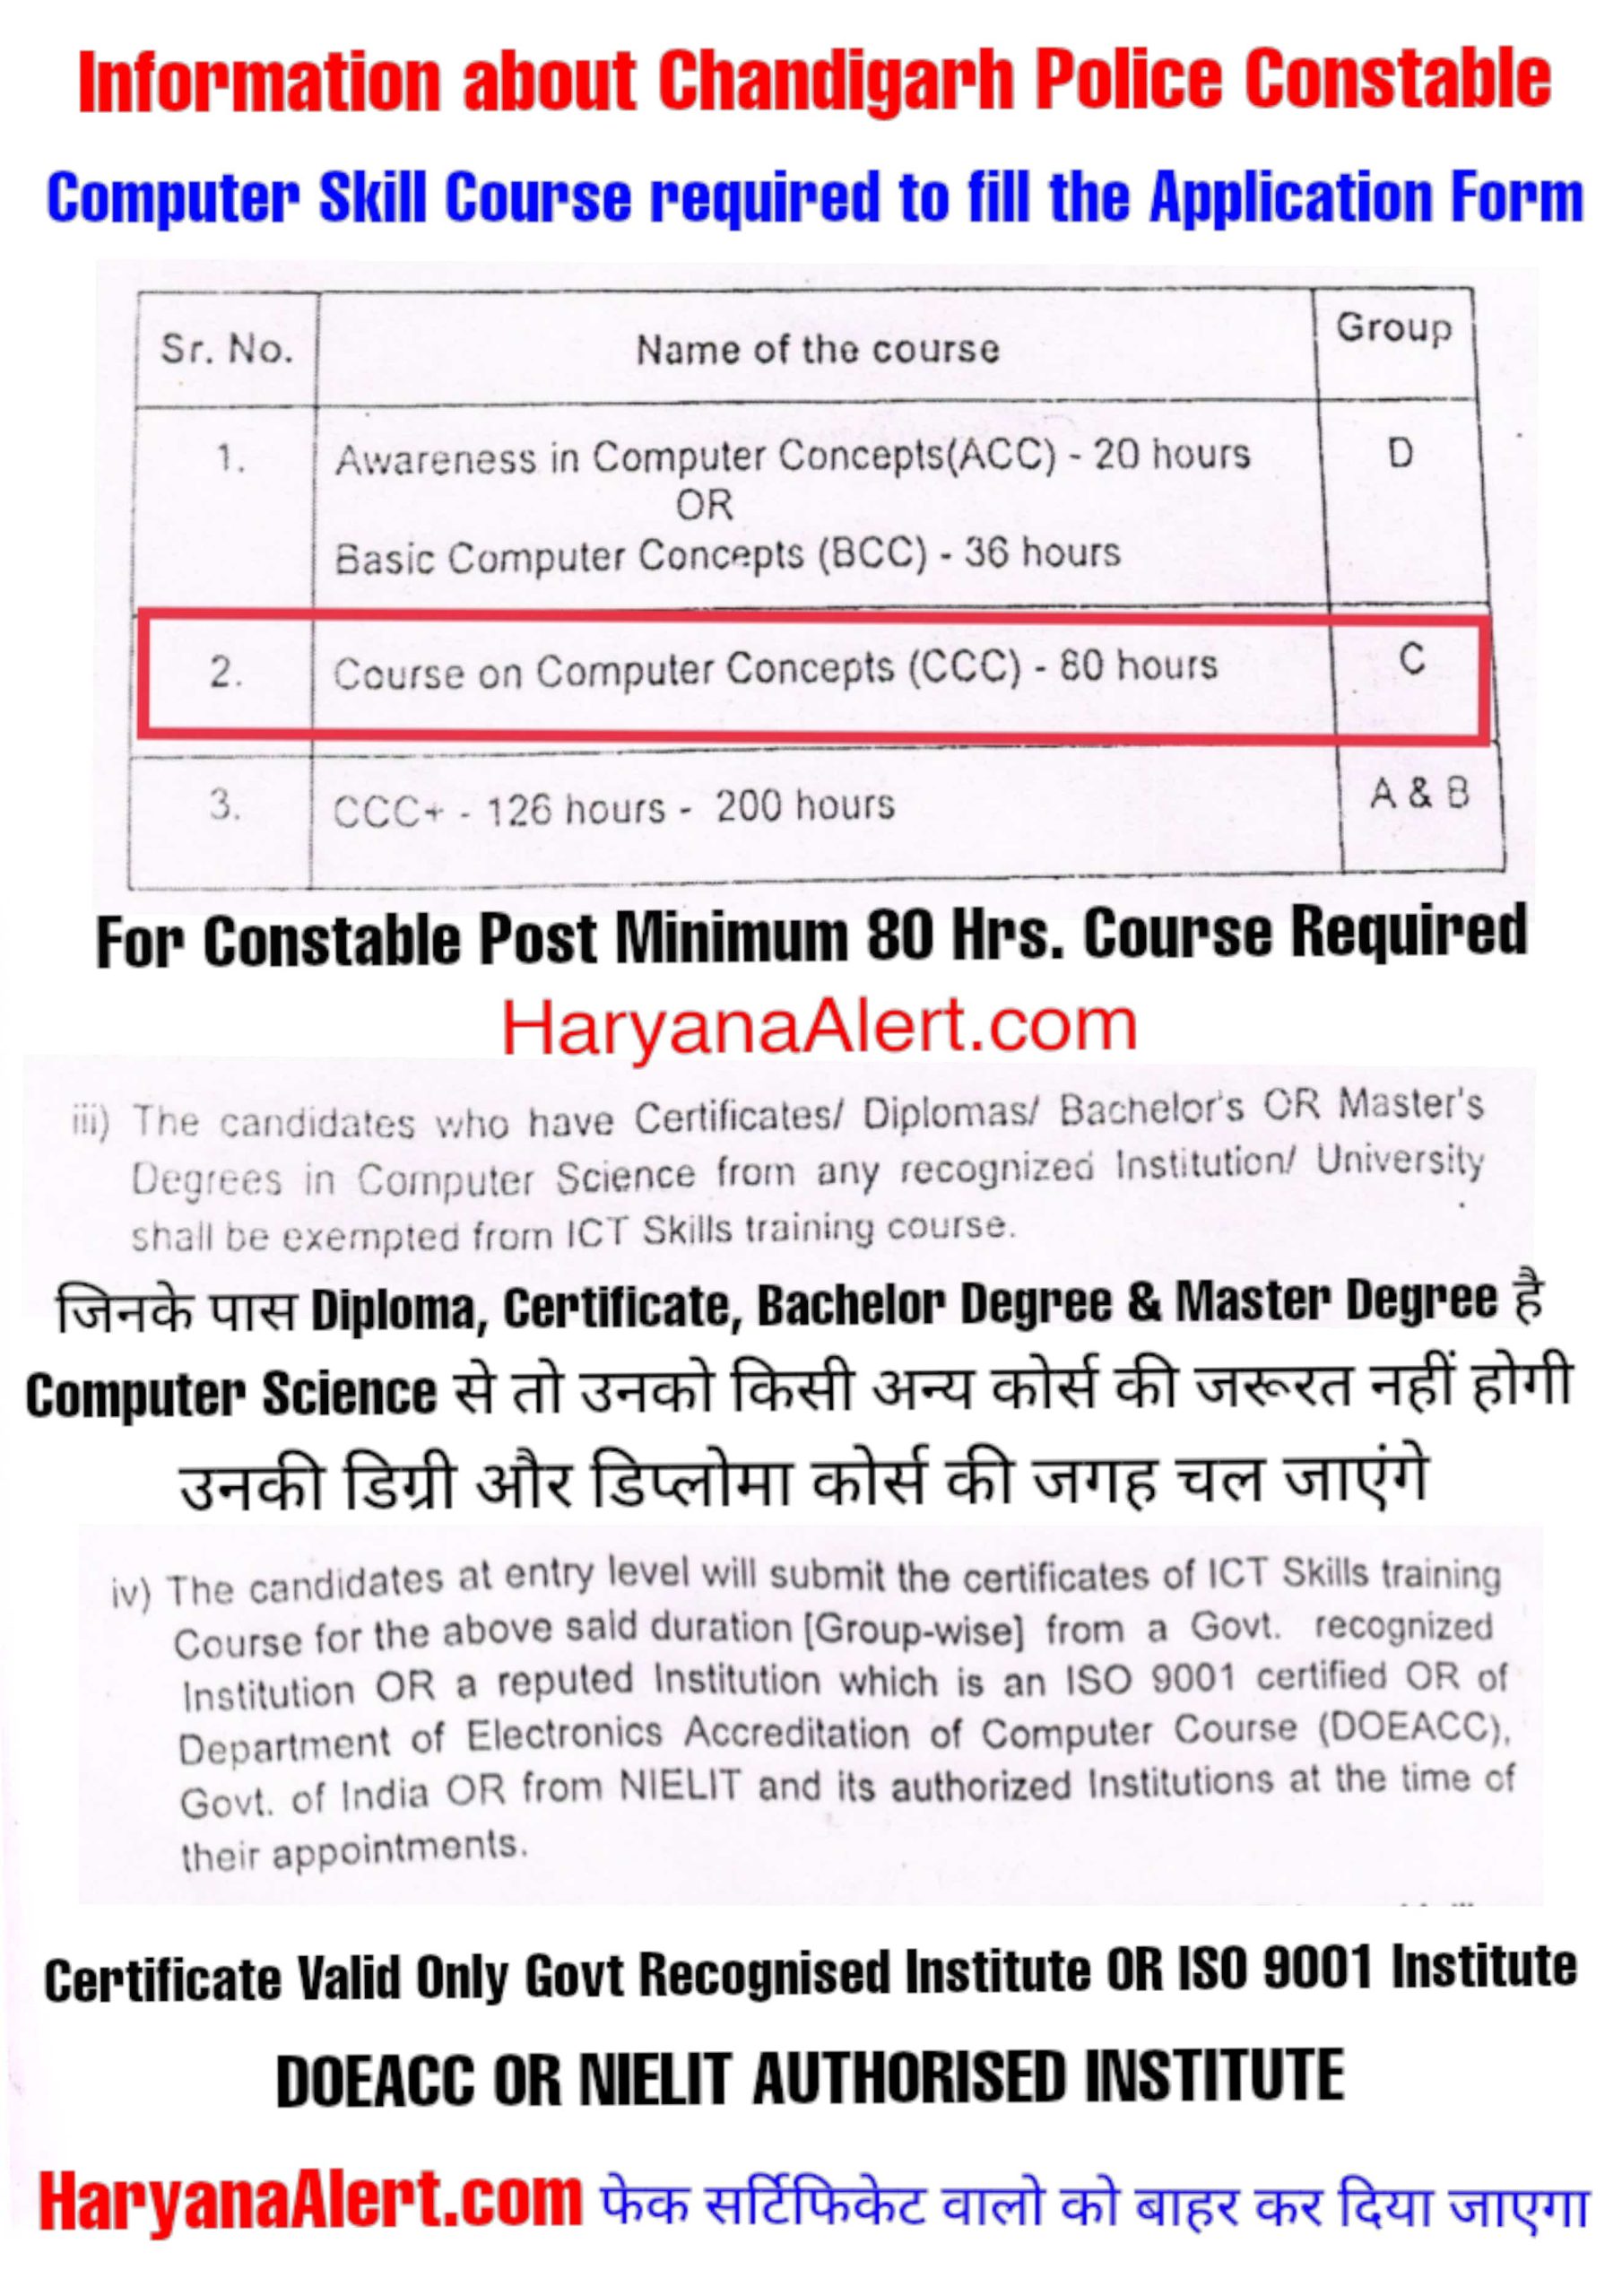 Some Important Instructions Regarding Computer Skill Course for Chandigarh Police